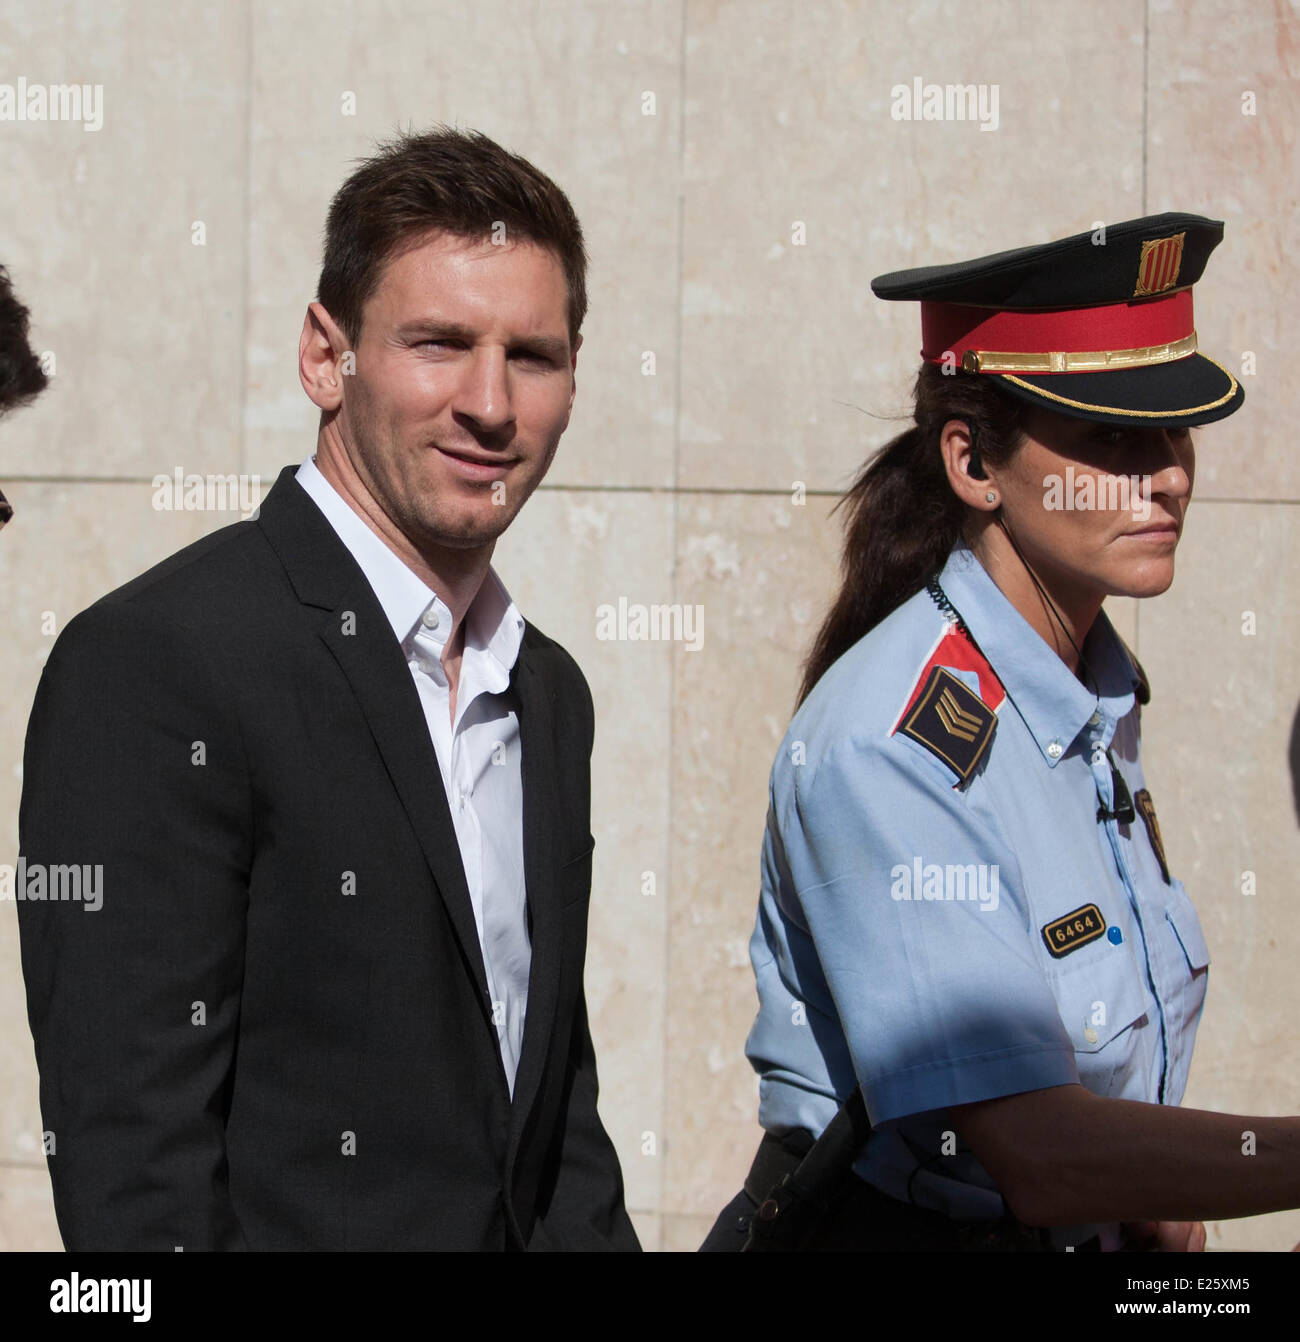 Barcelona's Argentine soccer player Lionel Messi arrives at a Spanish court over tax fraud allegations  Featuring: Lionel Messi Where: Gava, Spain When: 27 Sep 2013 Stock Photo